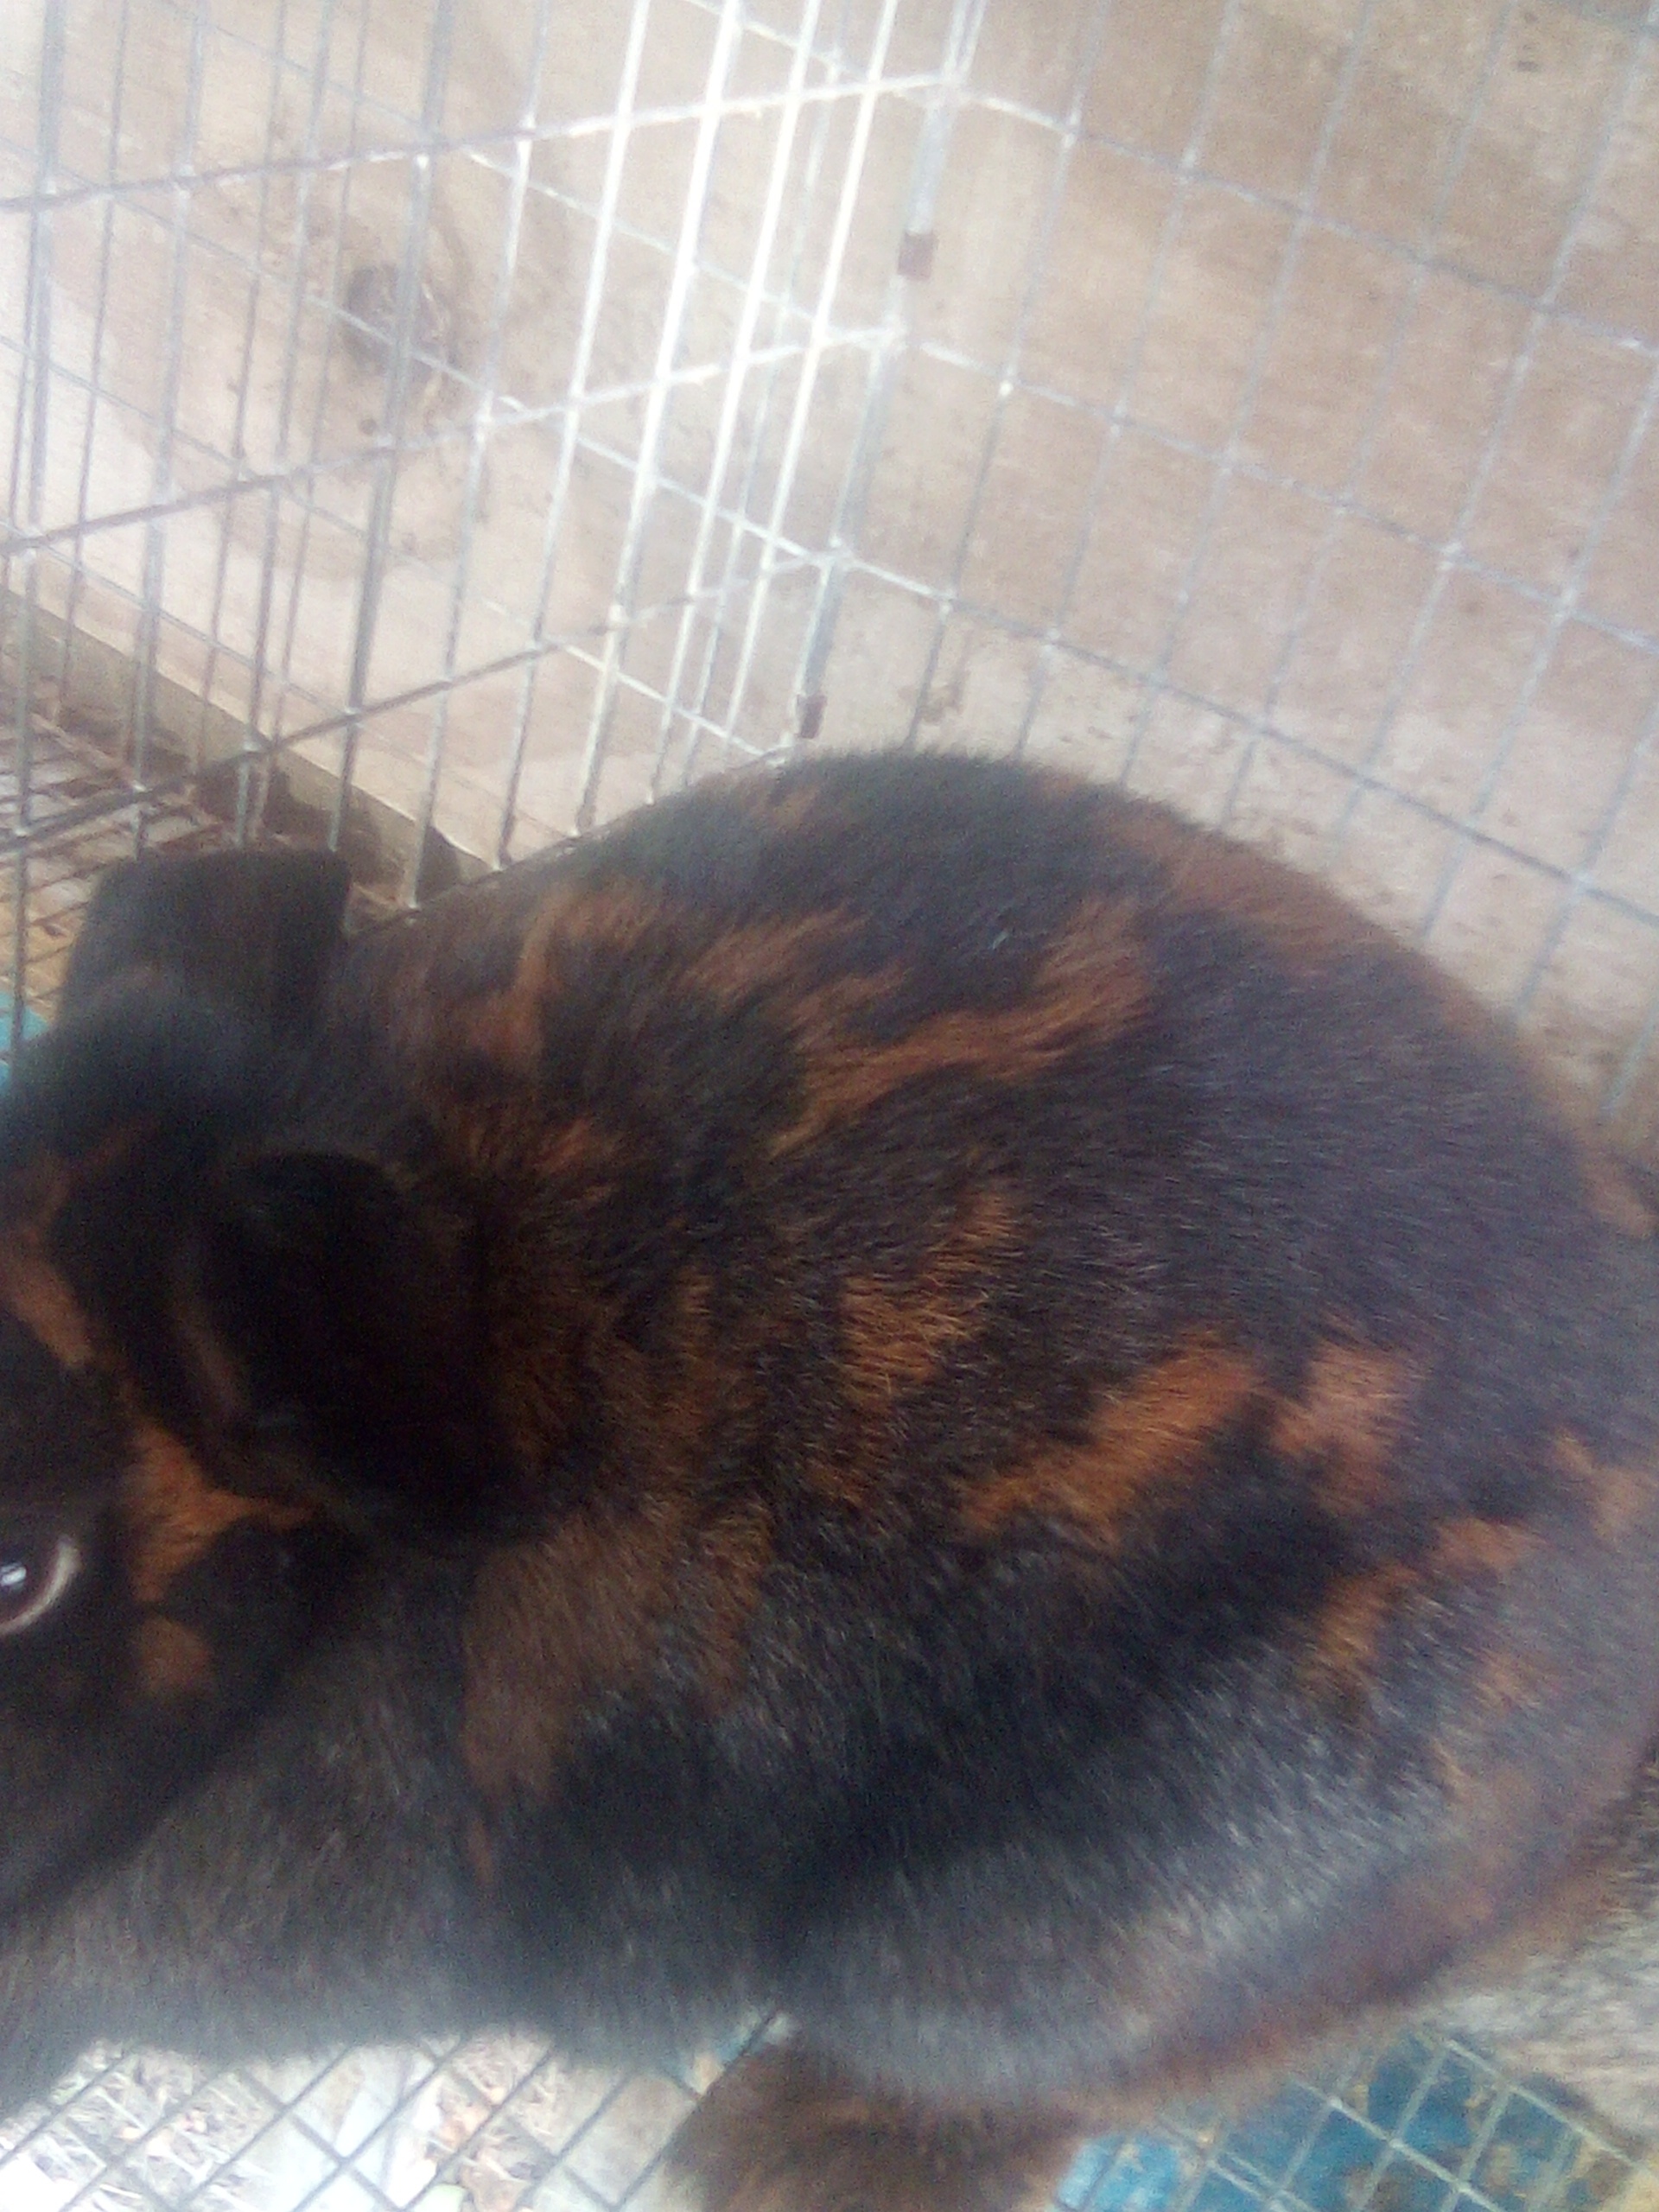 She is 1/2 Flemish giant and 1/2 checkered giant